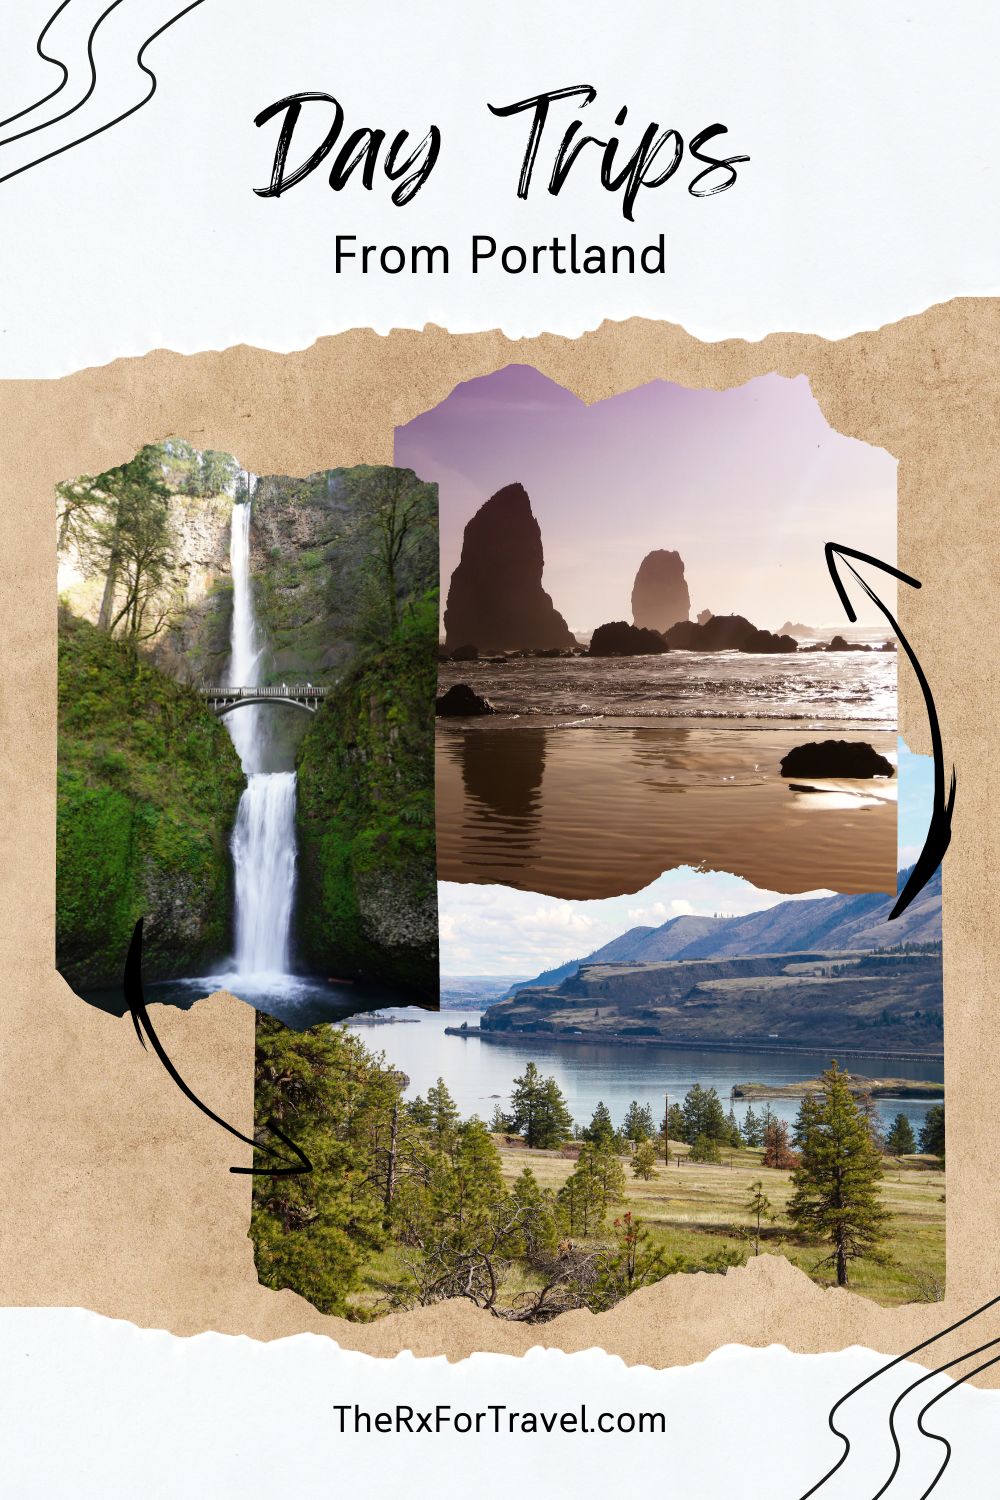 Check out all these amazing sites that are so close they can easily be done as day trips from Portland.